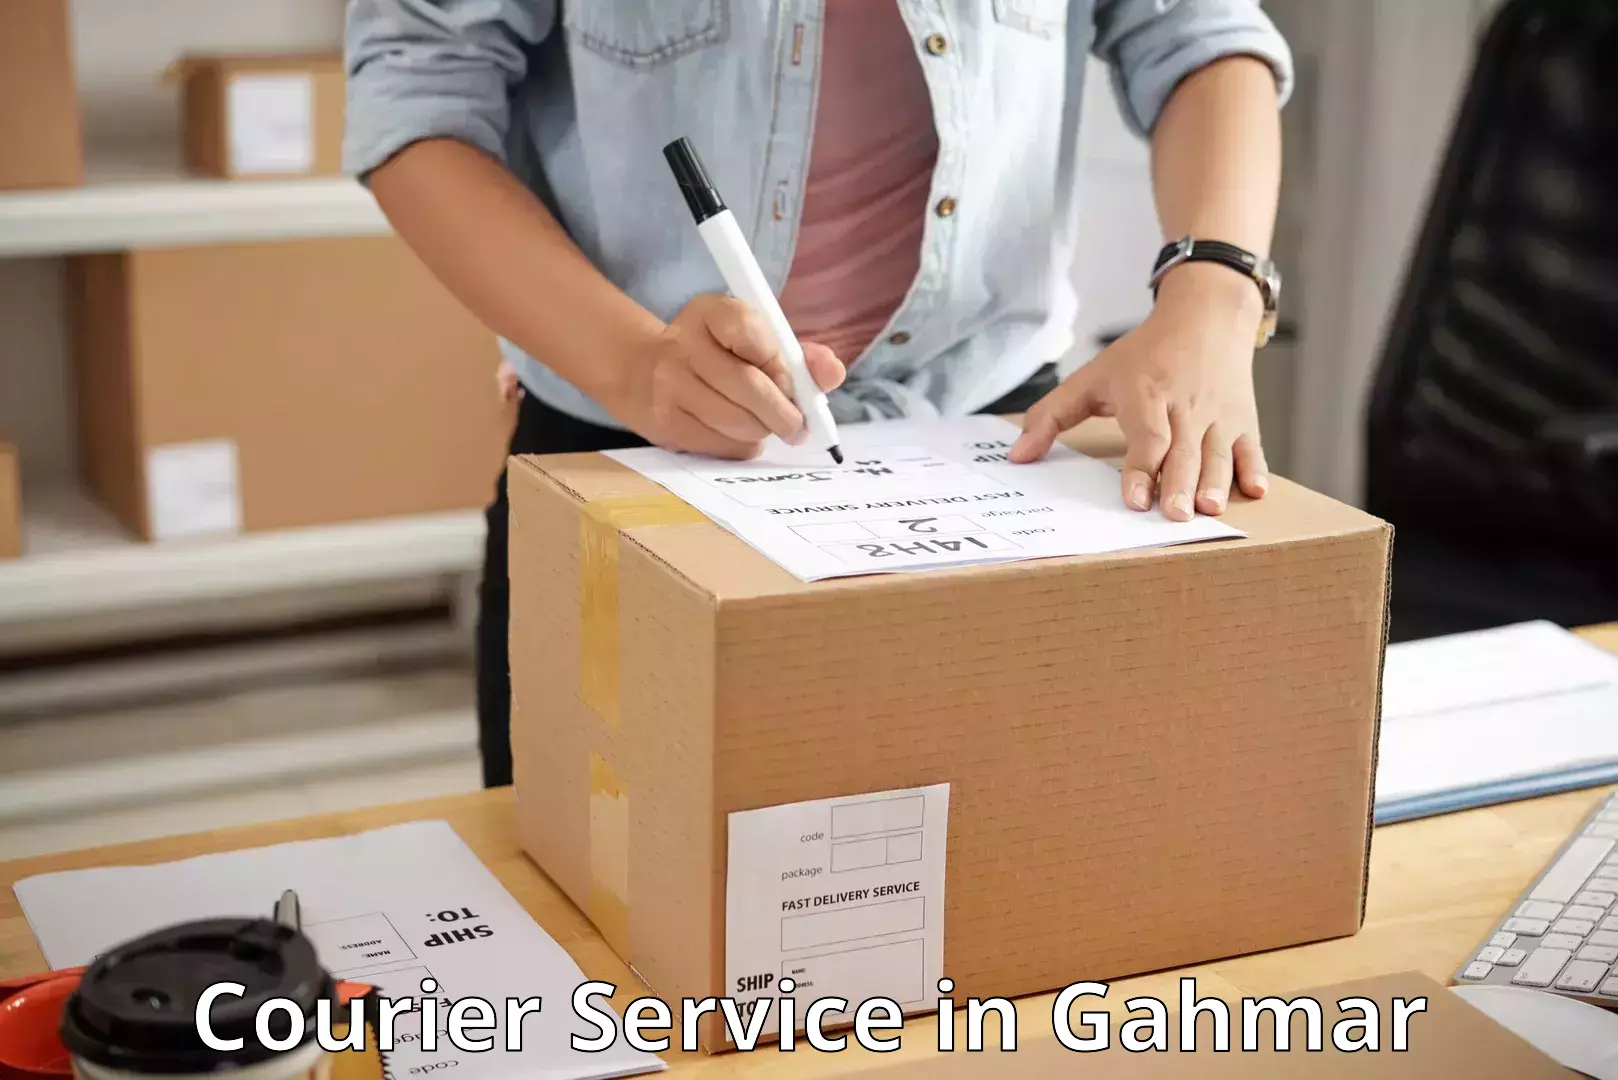 Nationwide delivery network in Gahmar